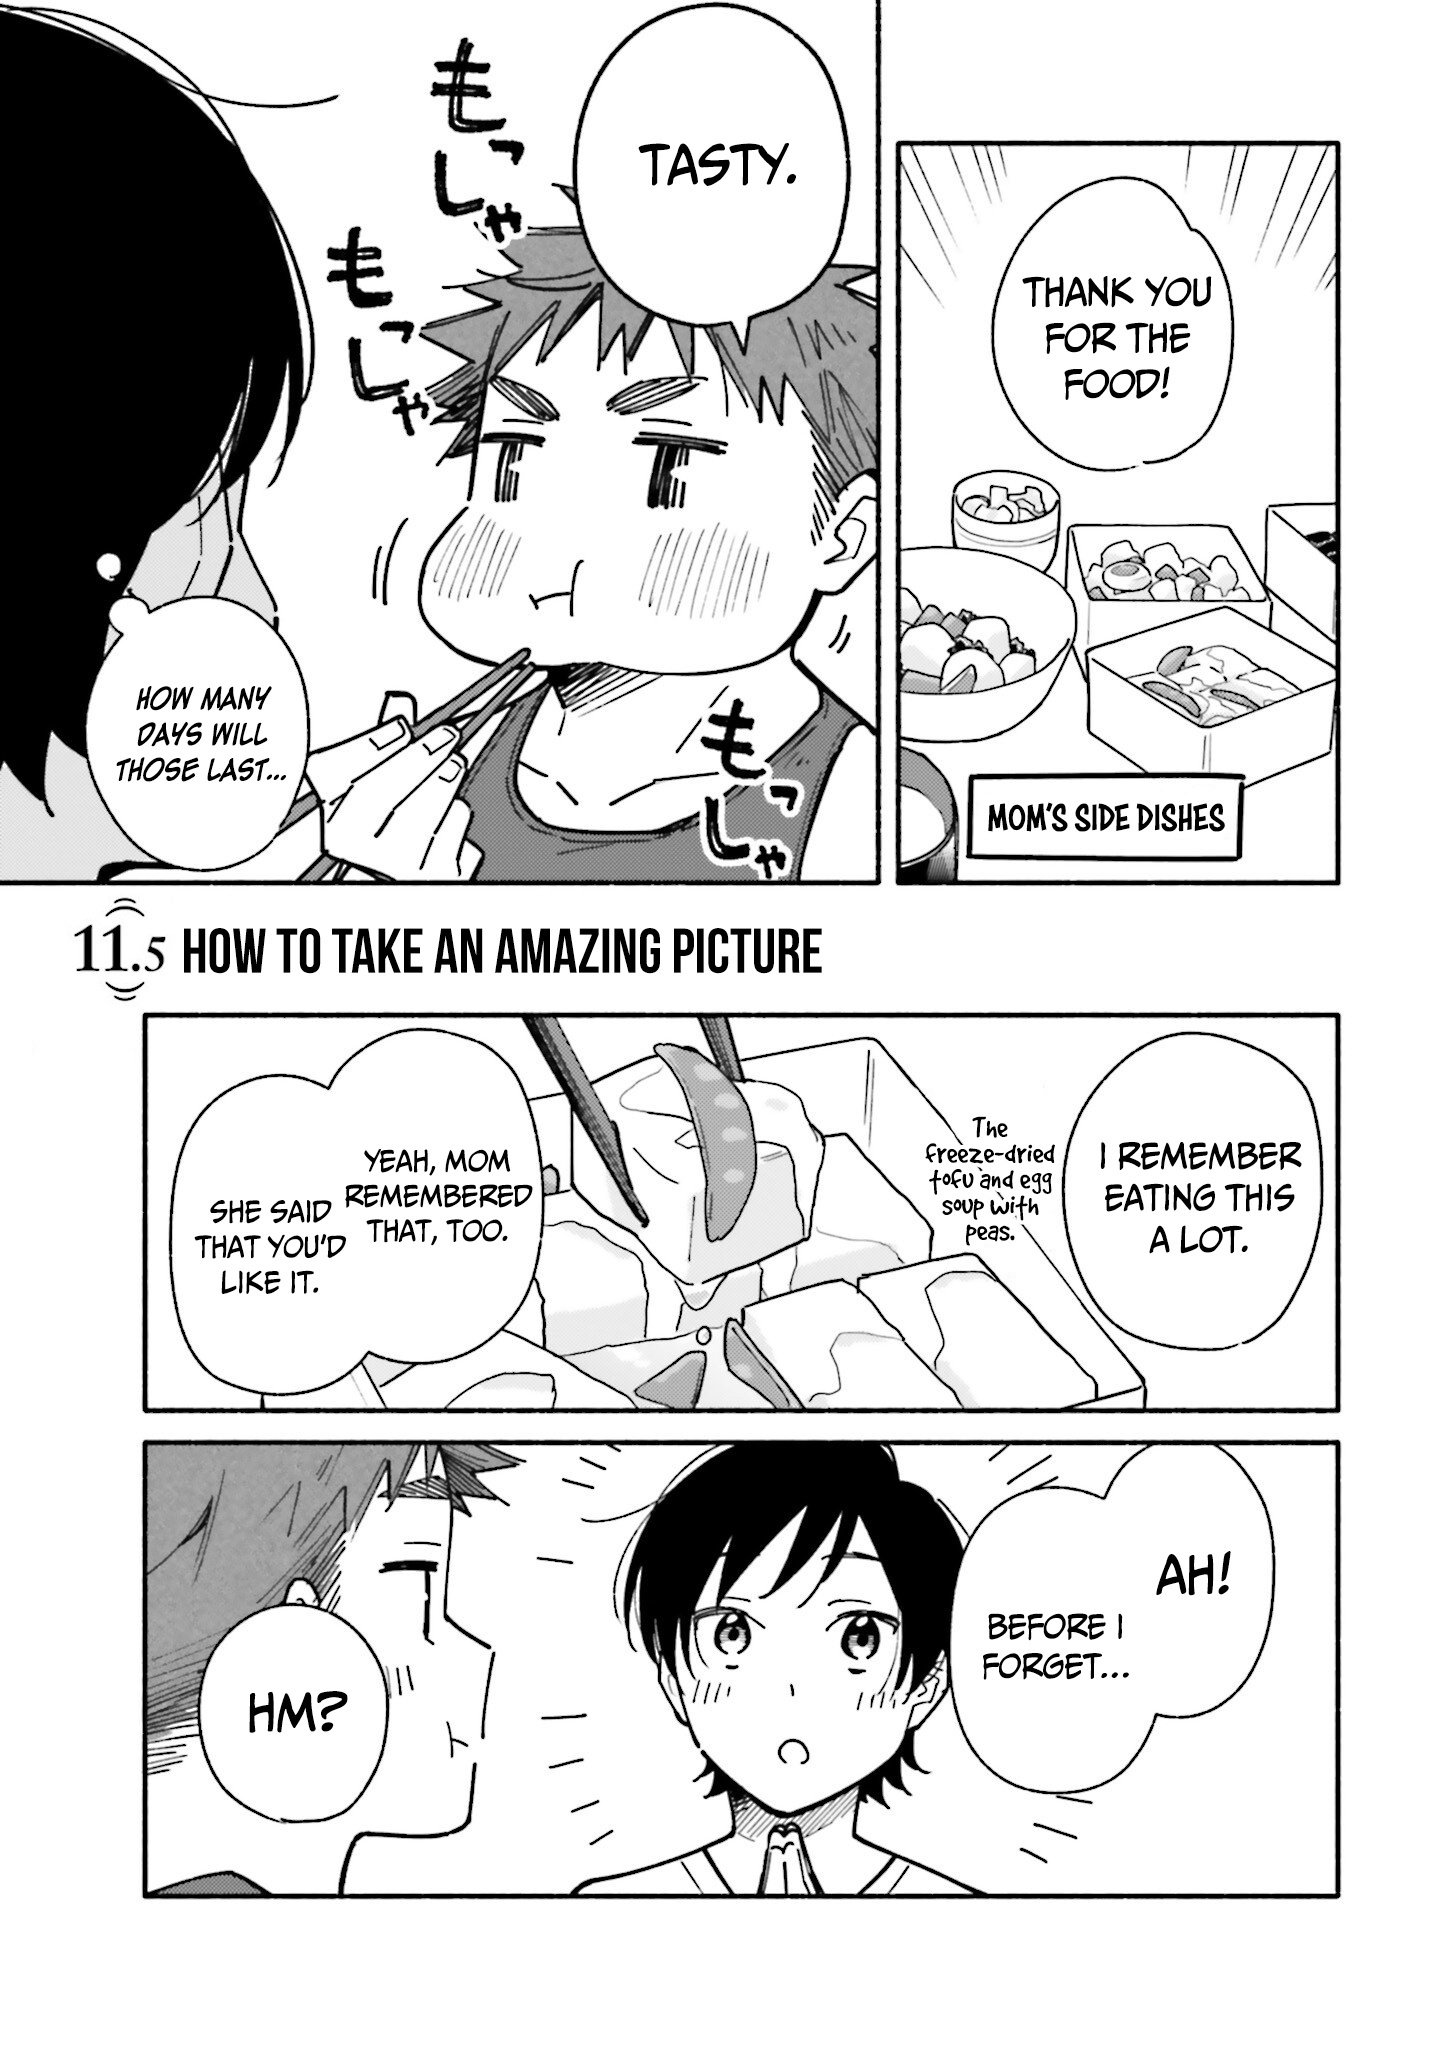 Aikagi-Kun To Shiawase Gohan Vol.2 Chapter 11.5: How To Take An Amazing Picture - Picture 2